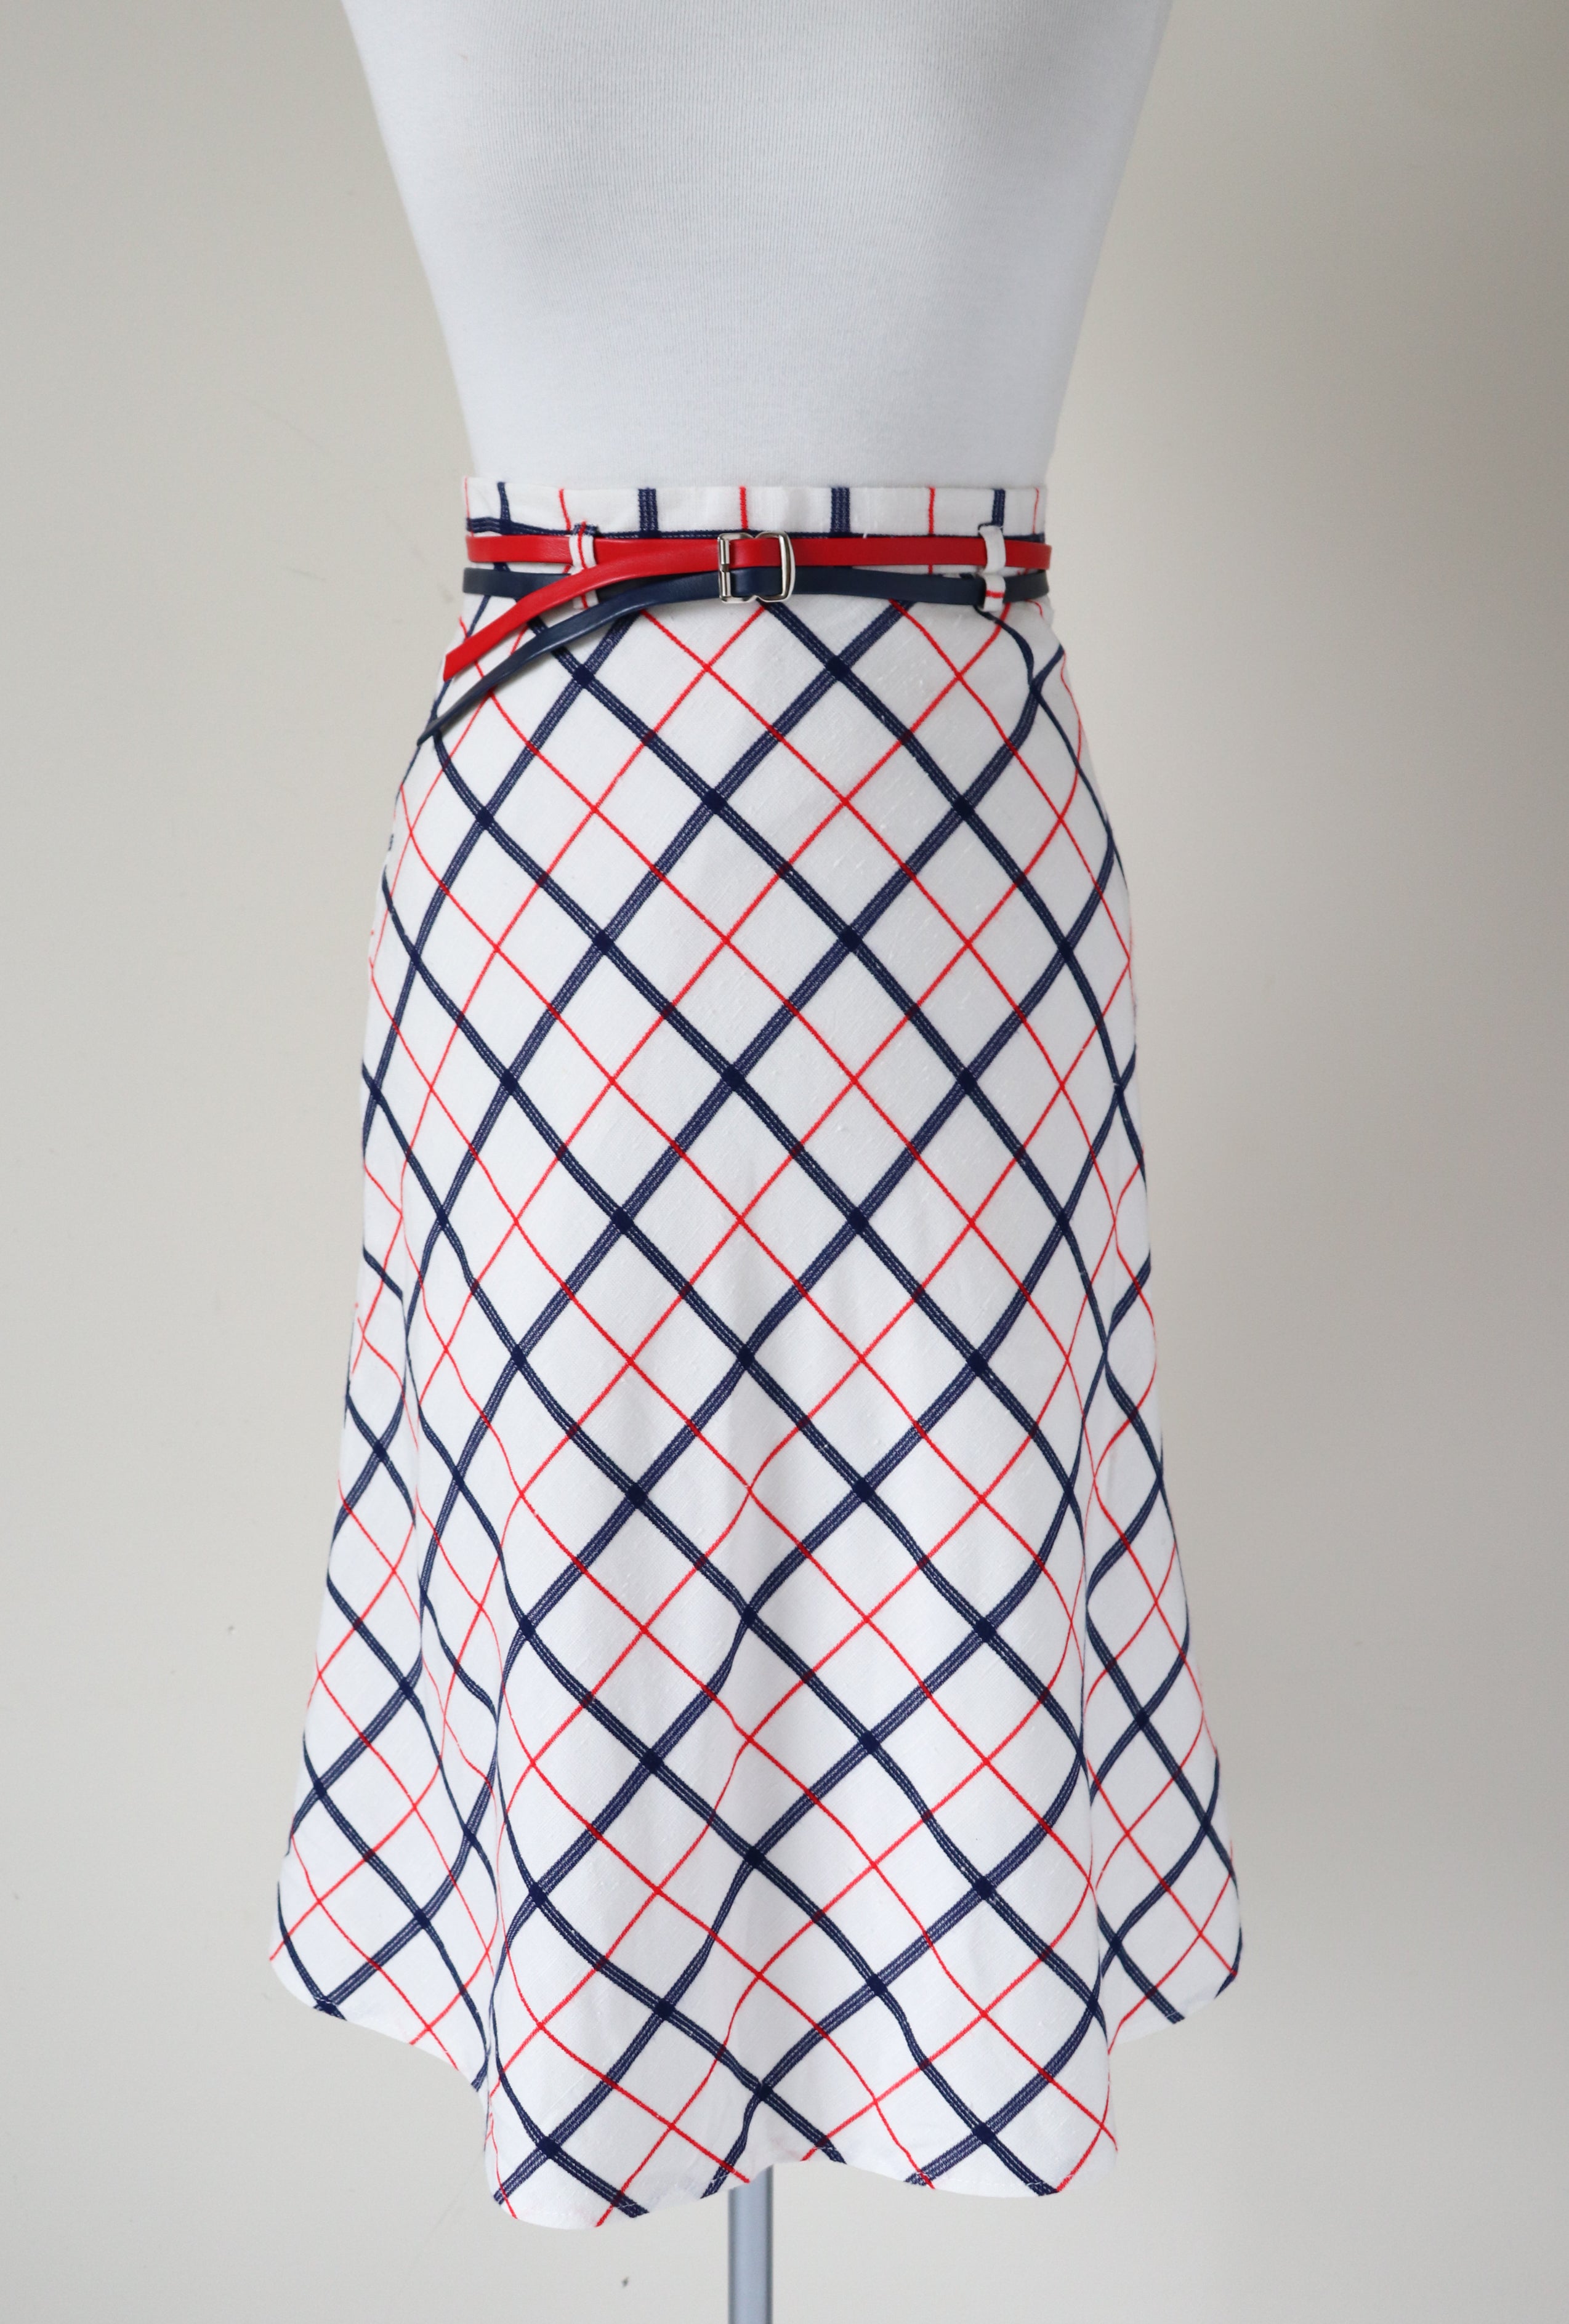 Vintage A-Line Skirt - Red / Blue / Ivory Check - XXXS -  UK 4 / 6